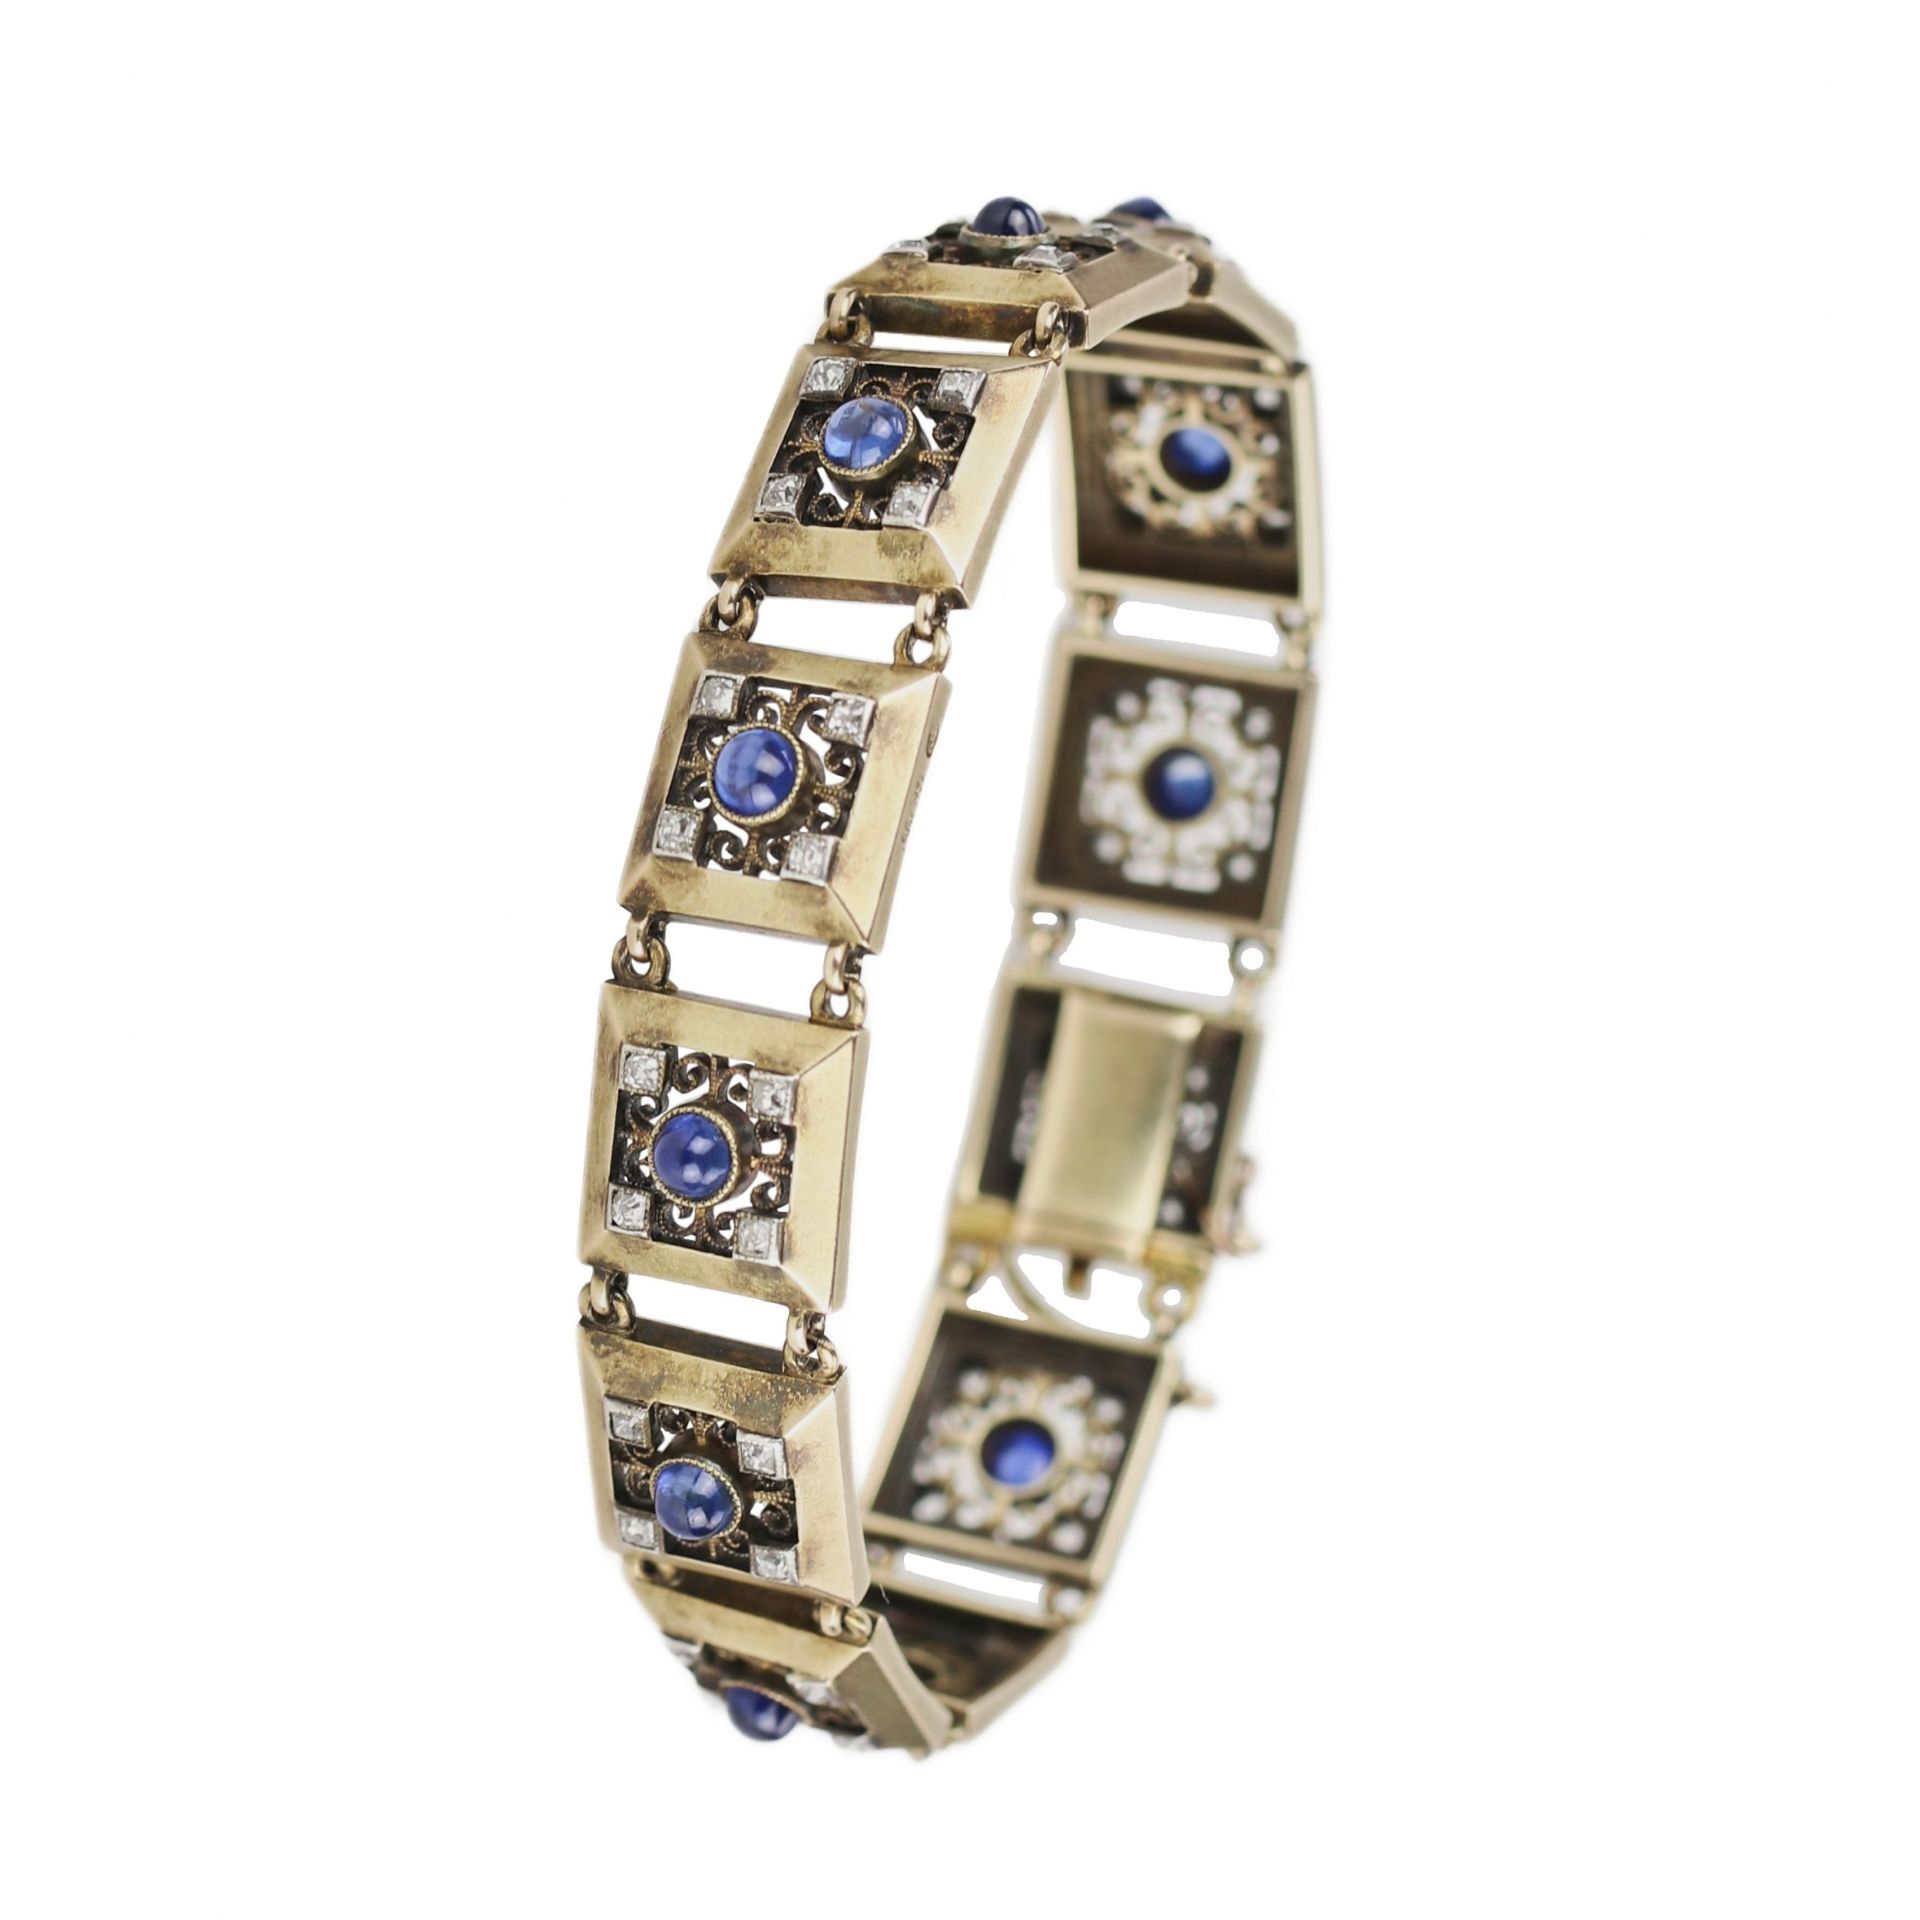 Elegant 56-carat Russian gold bracelet with sapphires and diamonds from Faberge firm. Moscow, Russia